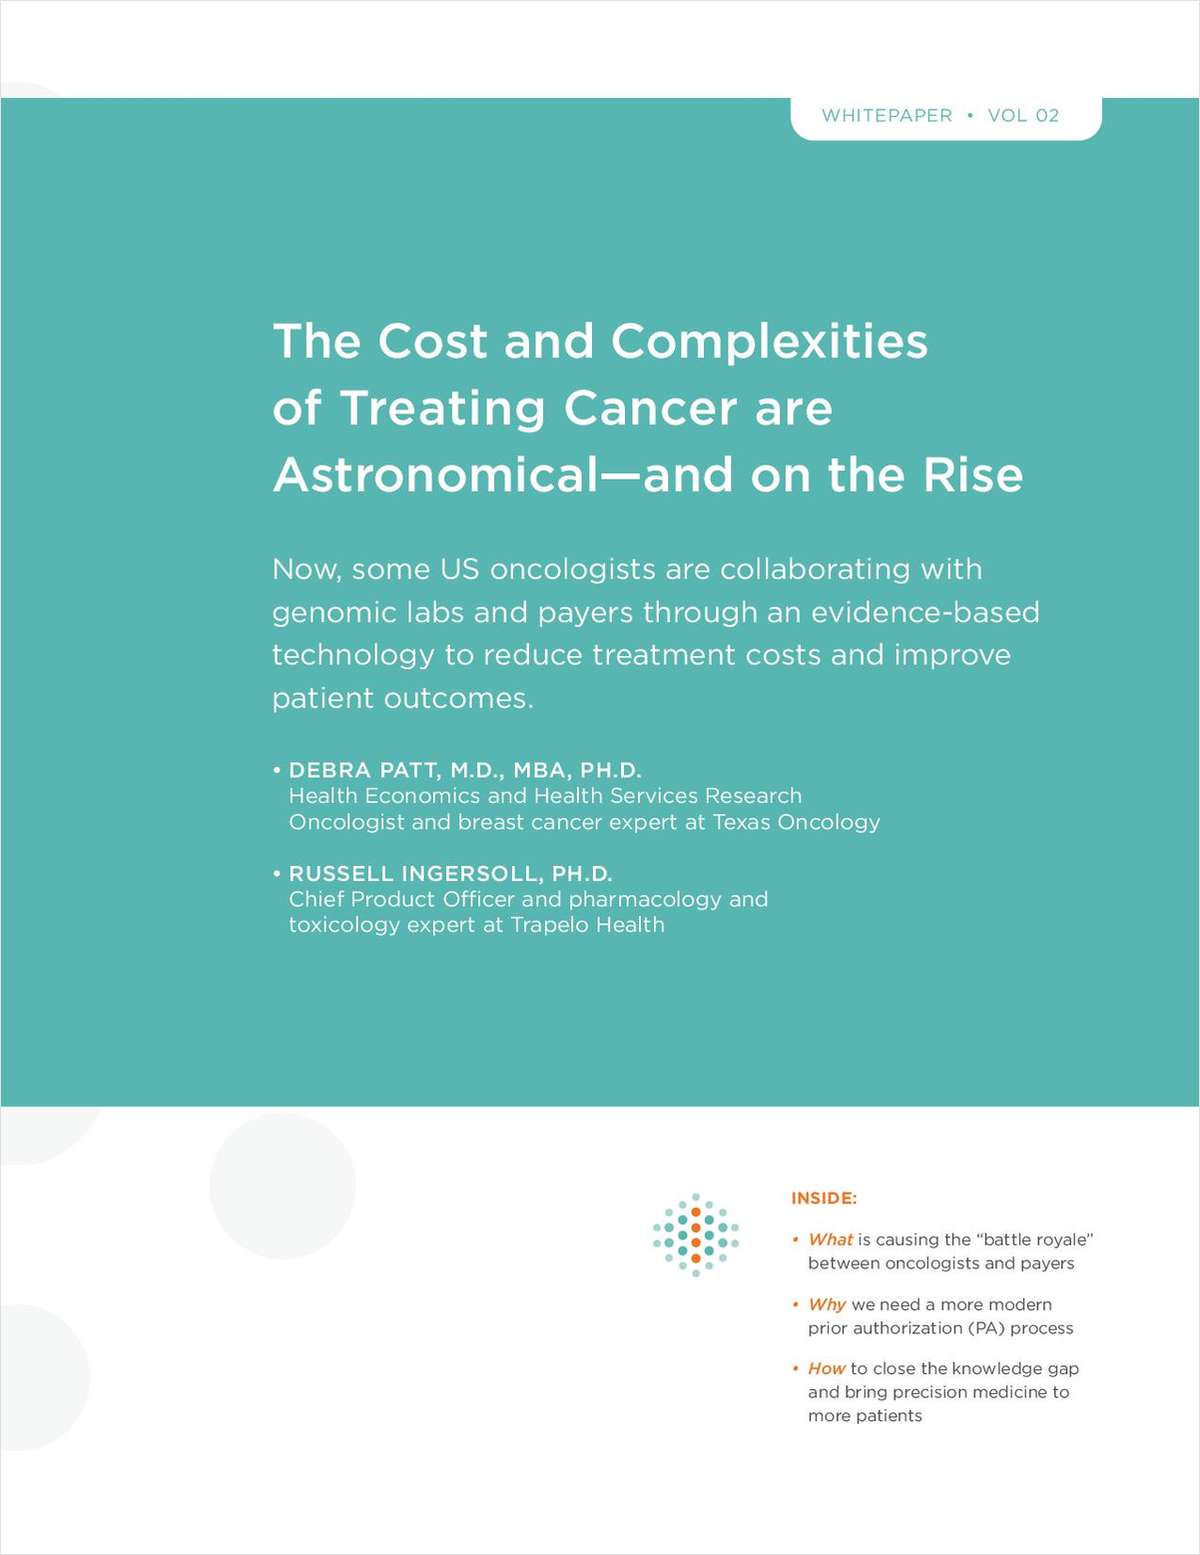 The Cost and Complexities of Treating Cancer are Astronomical -- and on the Rise